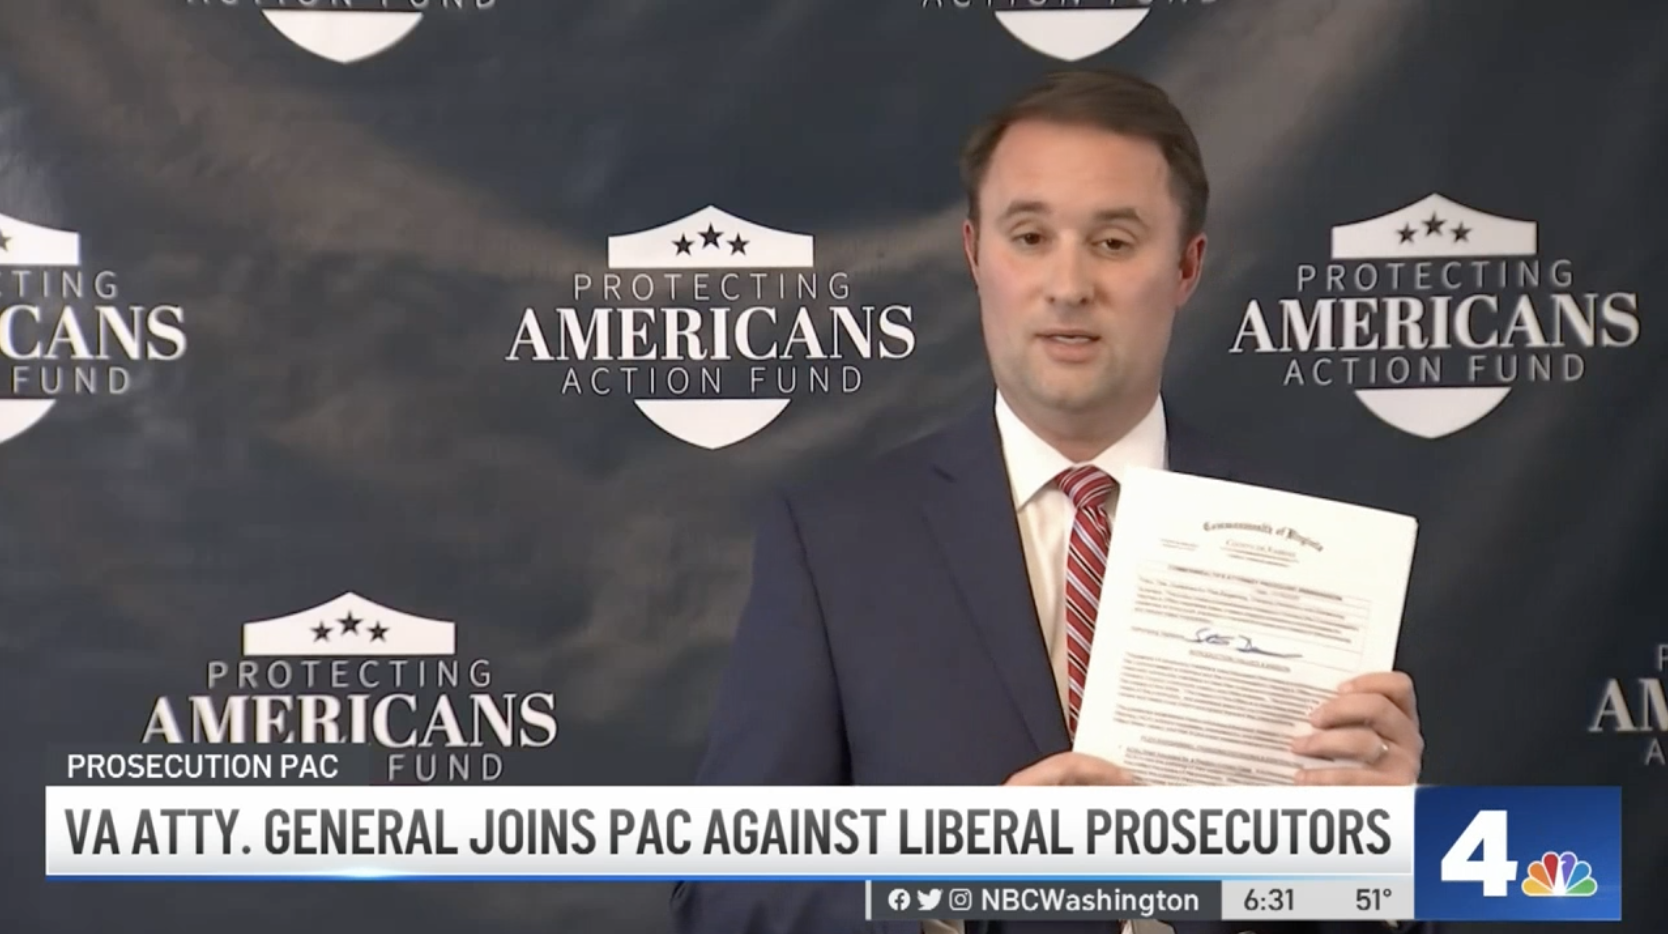 Featured image for “Attorney General Teams Up With GOPAC Against Liberal Prosecutors”